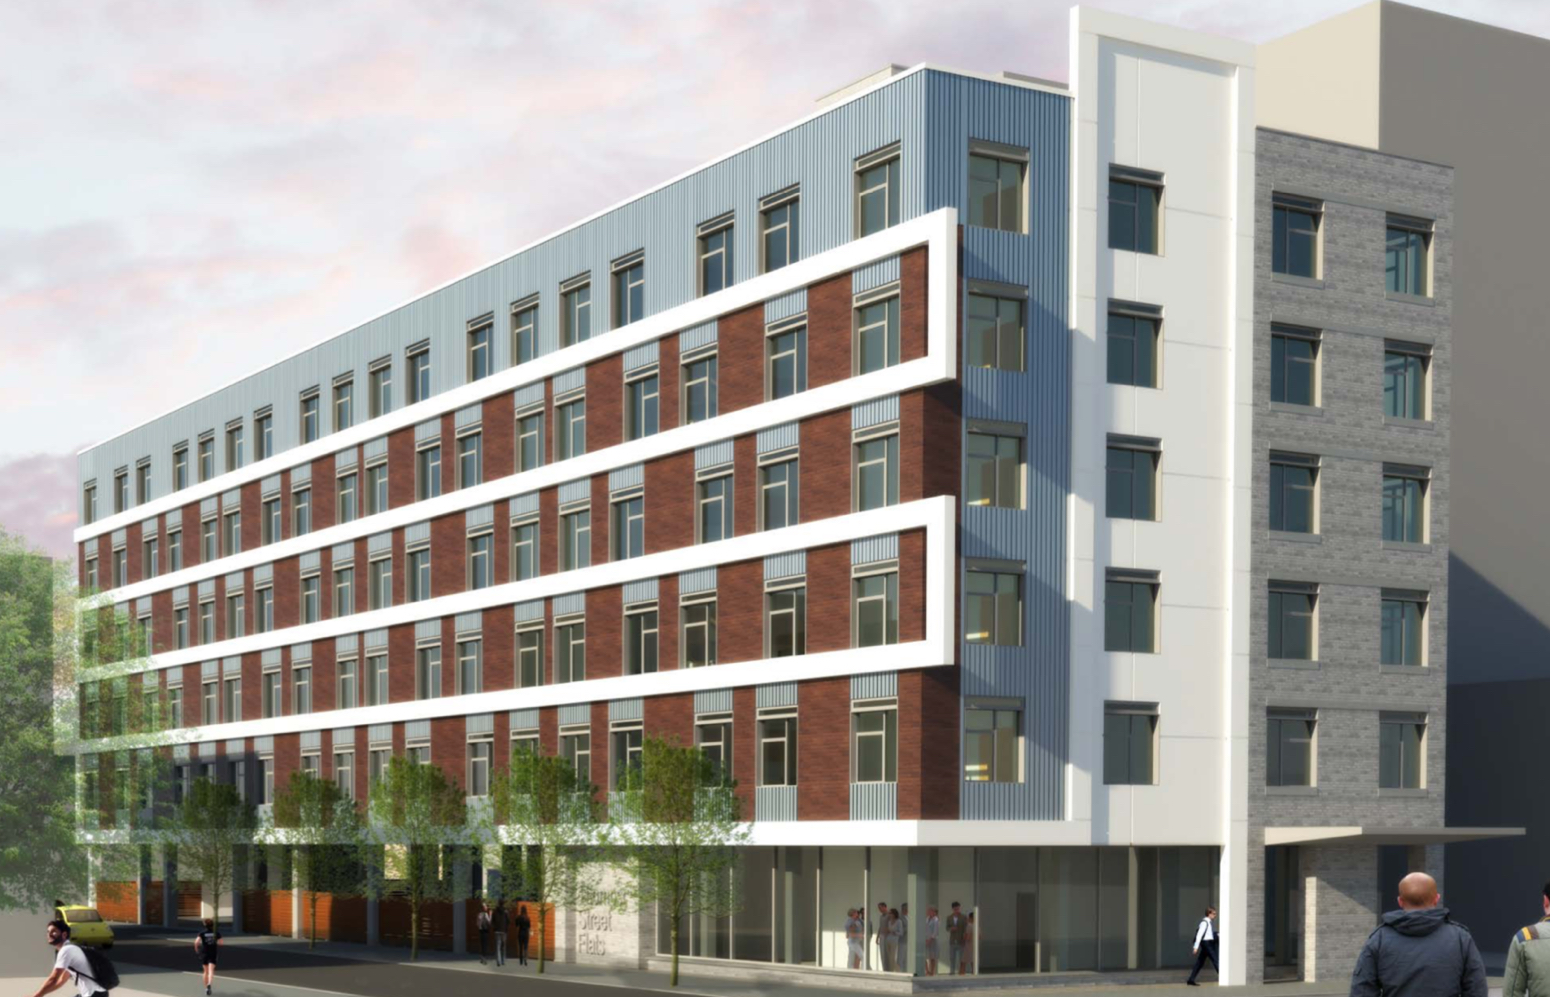 Rendering of 801 West Girard Avenue. Credit: PZS Architects.